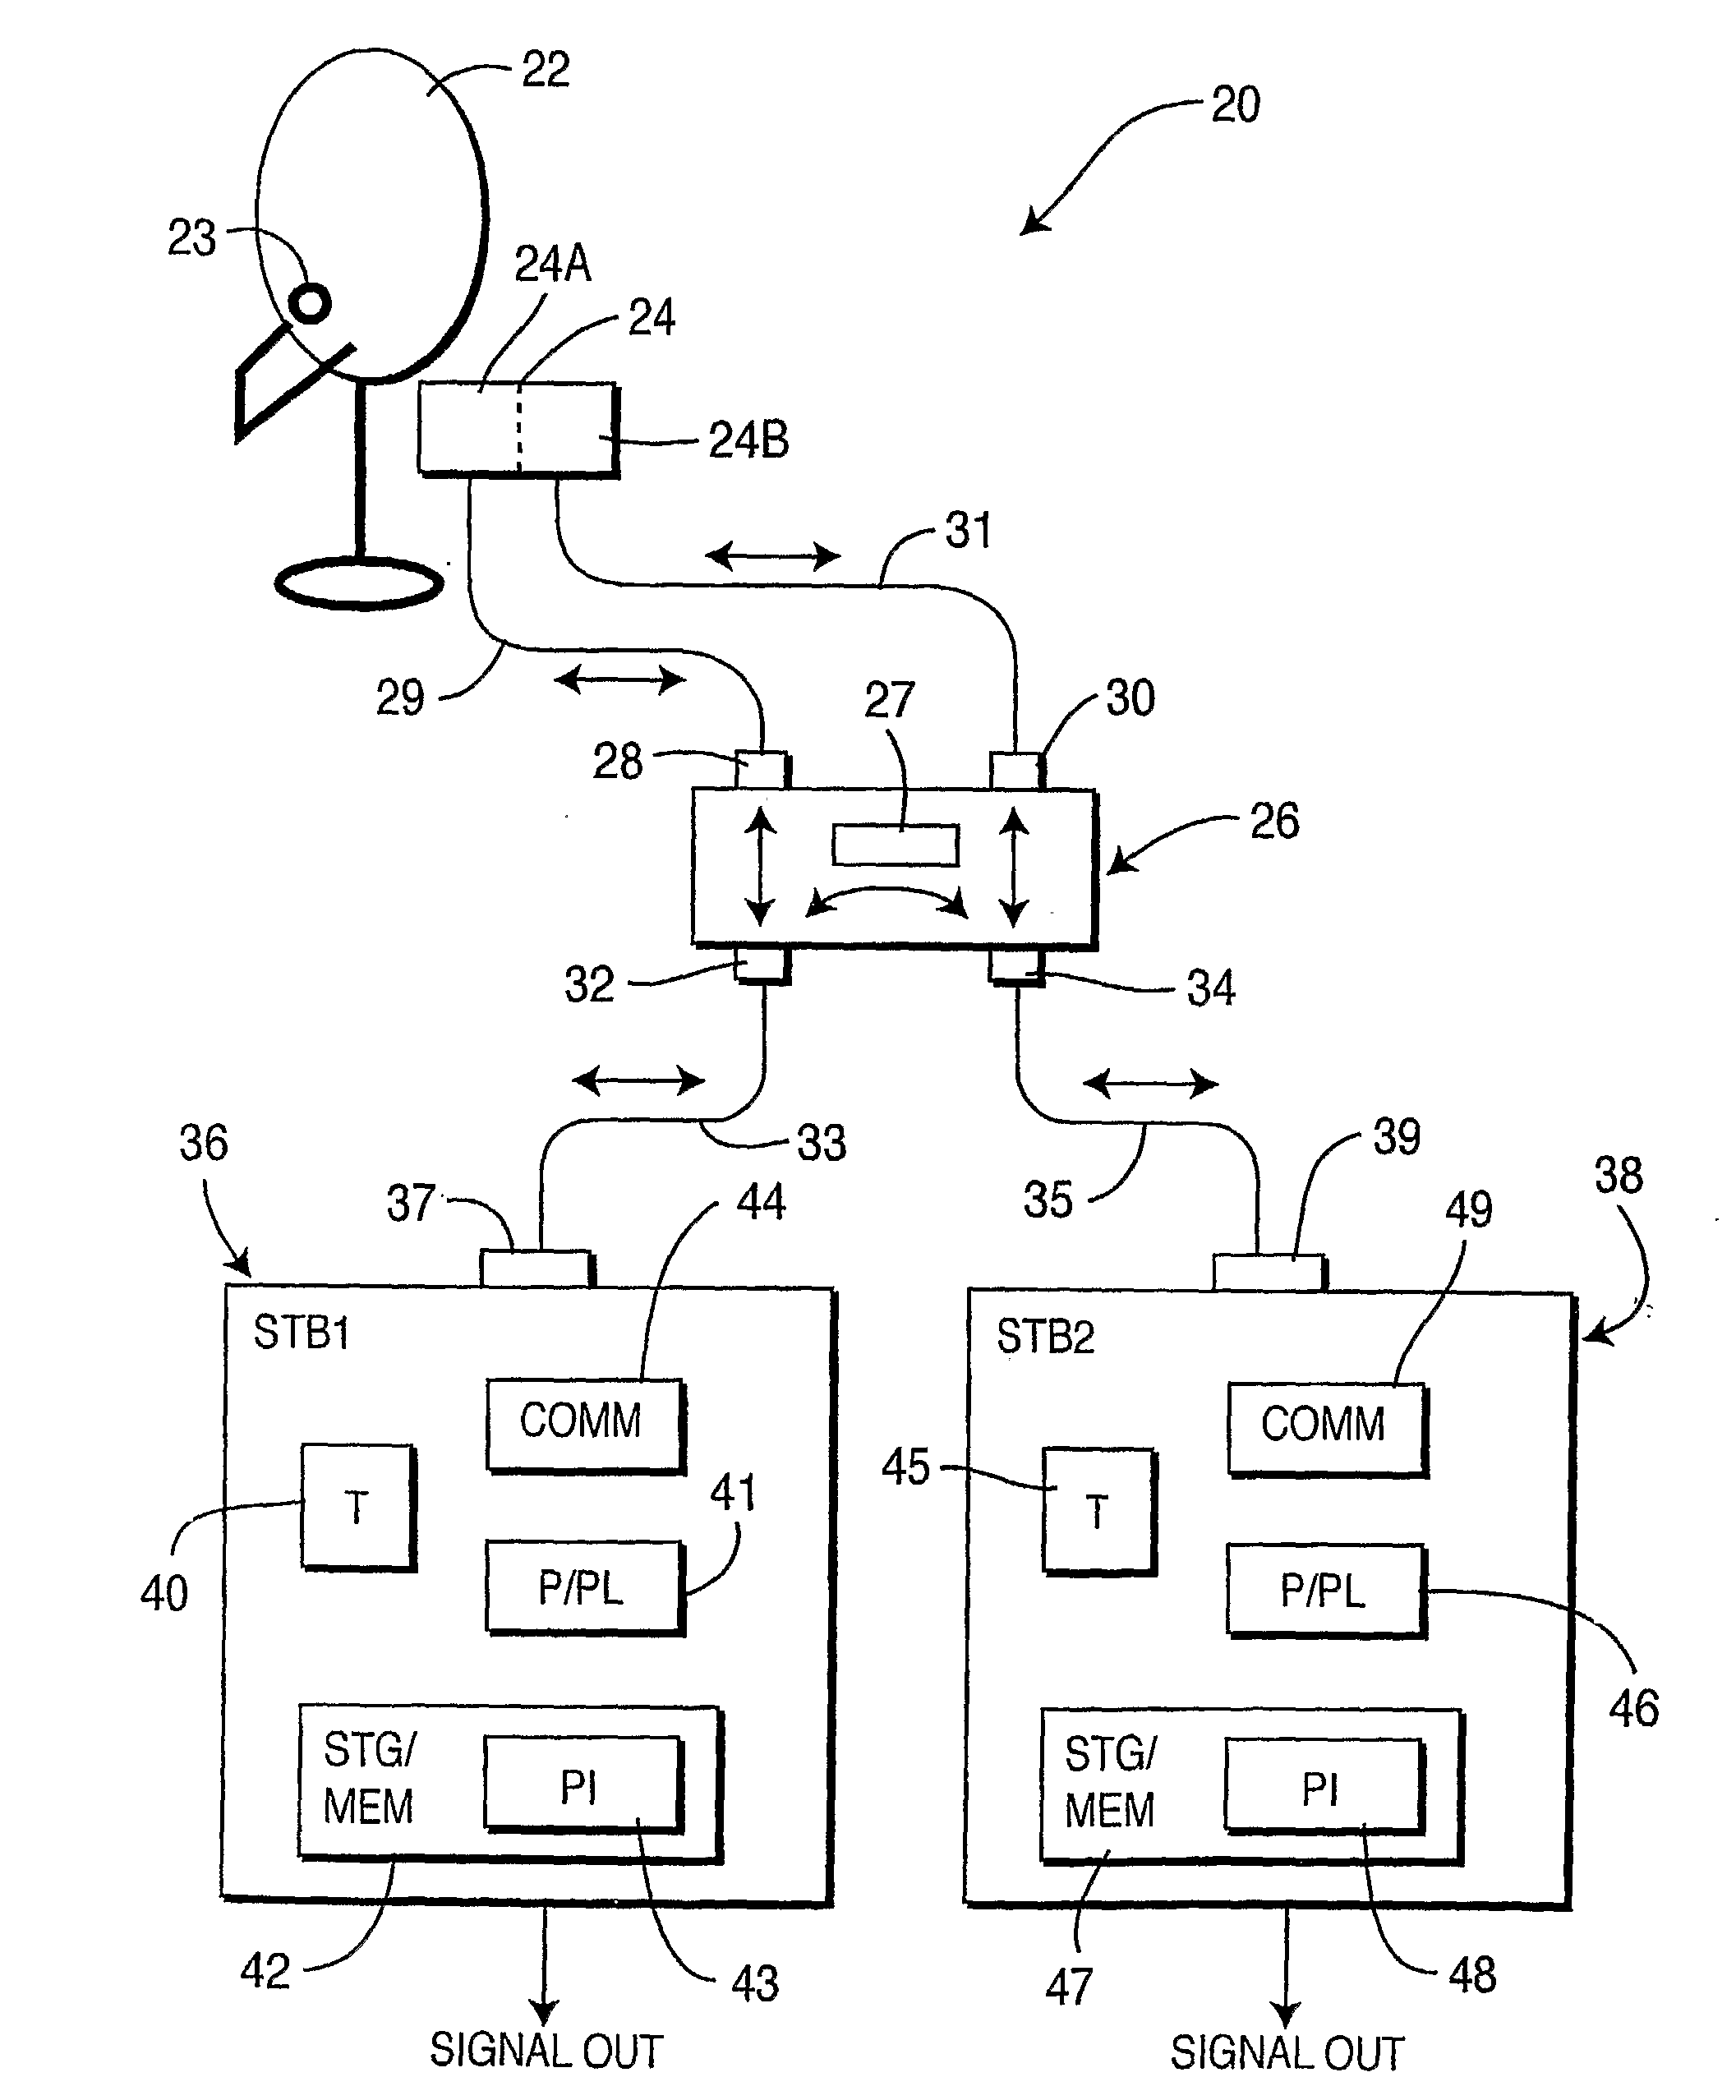 Supporting Multiple Disecq Master Devices in a Video Distribution System